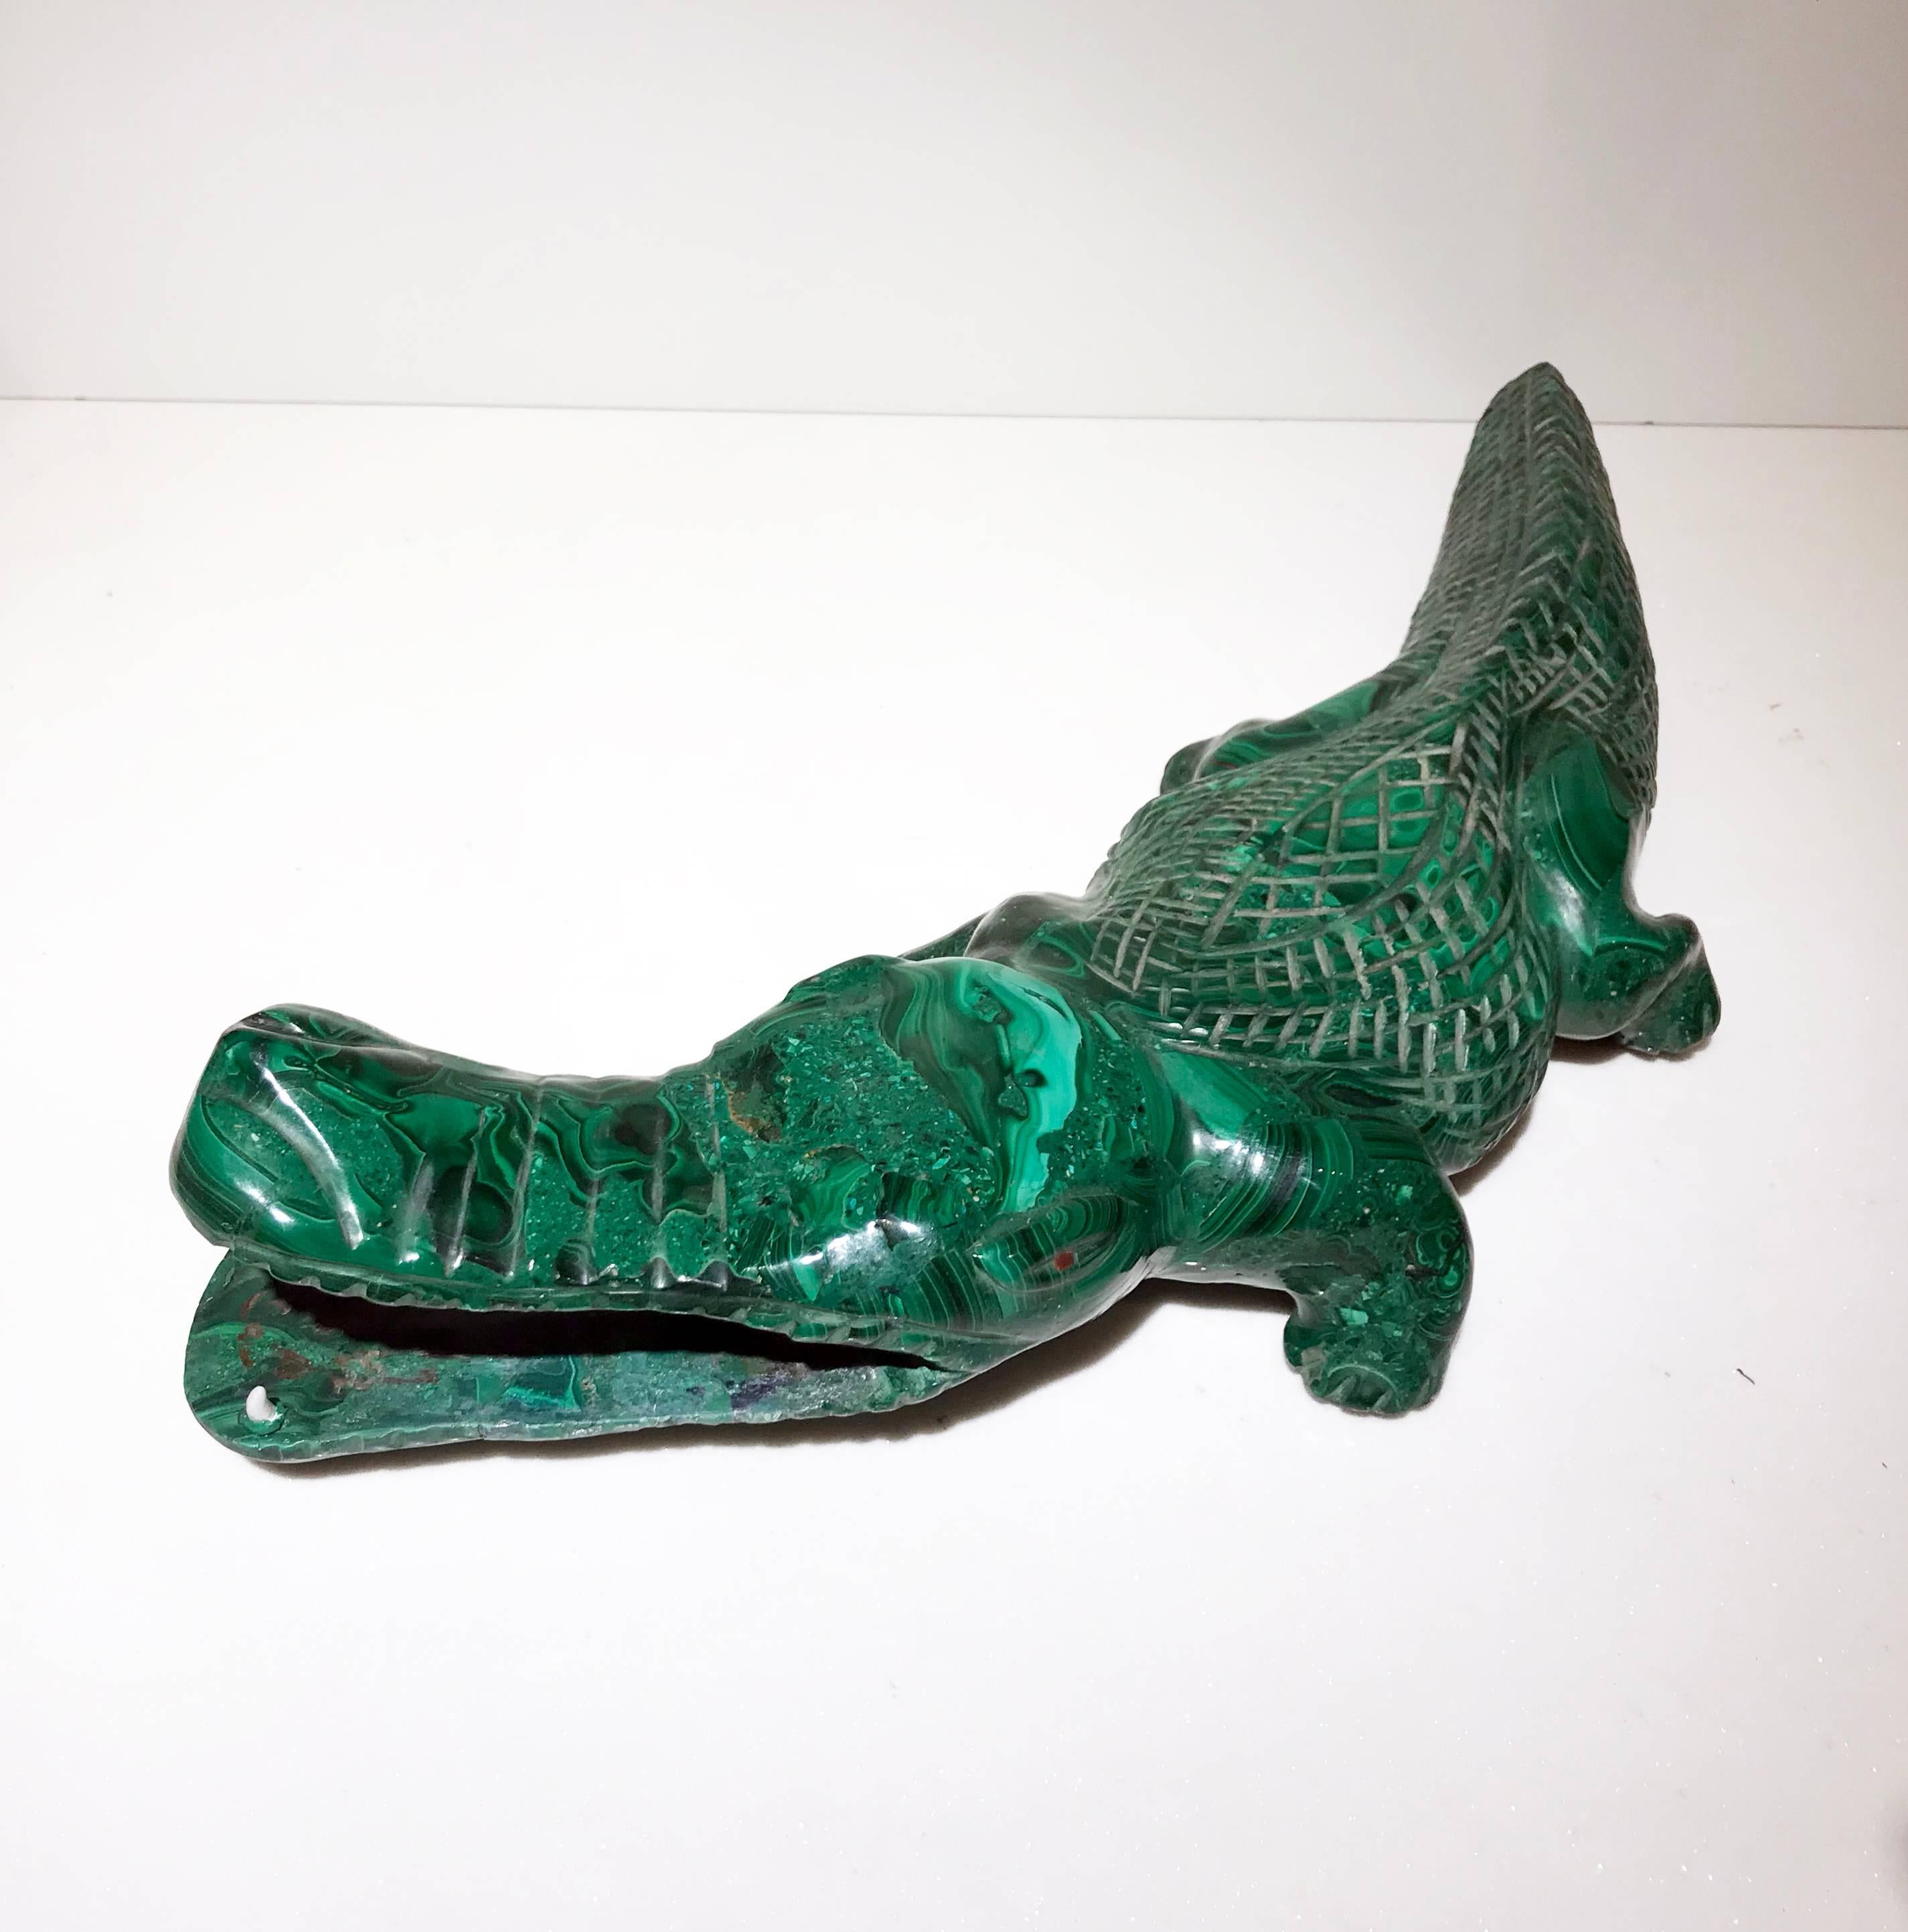 Carved from a block of beautiful and precious malachite, this sculpture represent a crocodile one of the most ancient beings with a large tradition of representation in art, for his iconic style and symbolism. The way in which the animal is carved